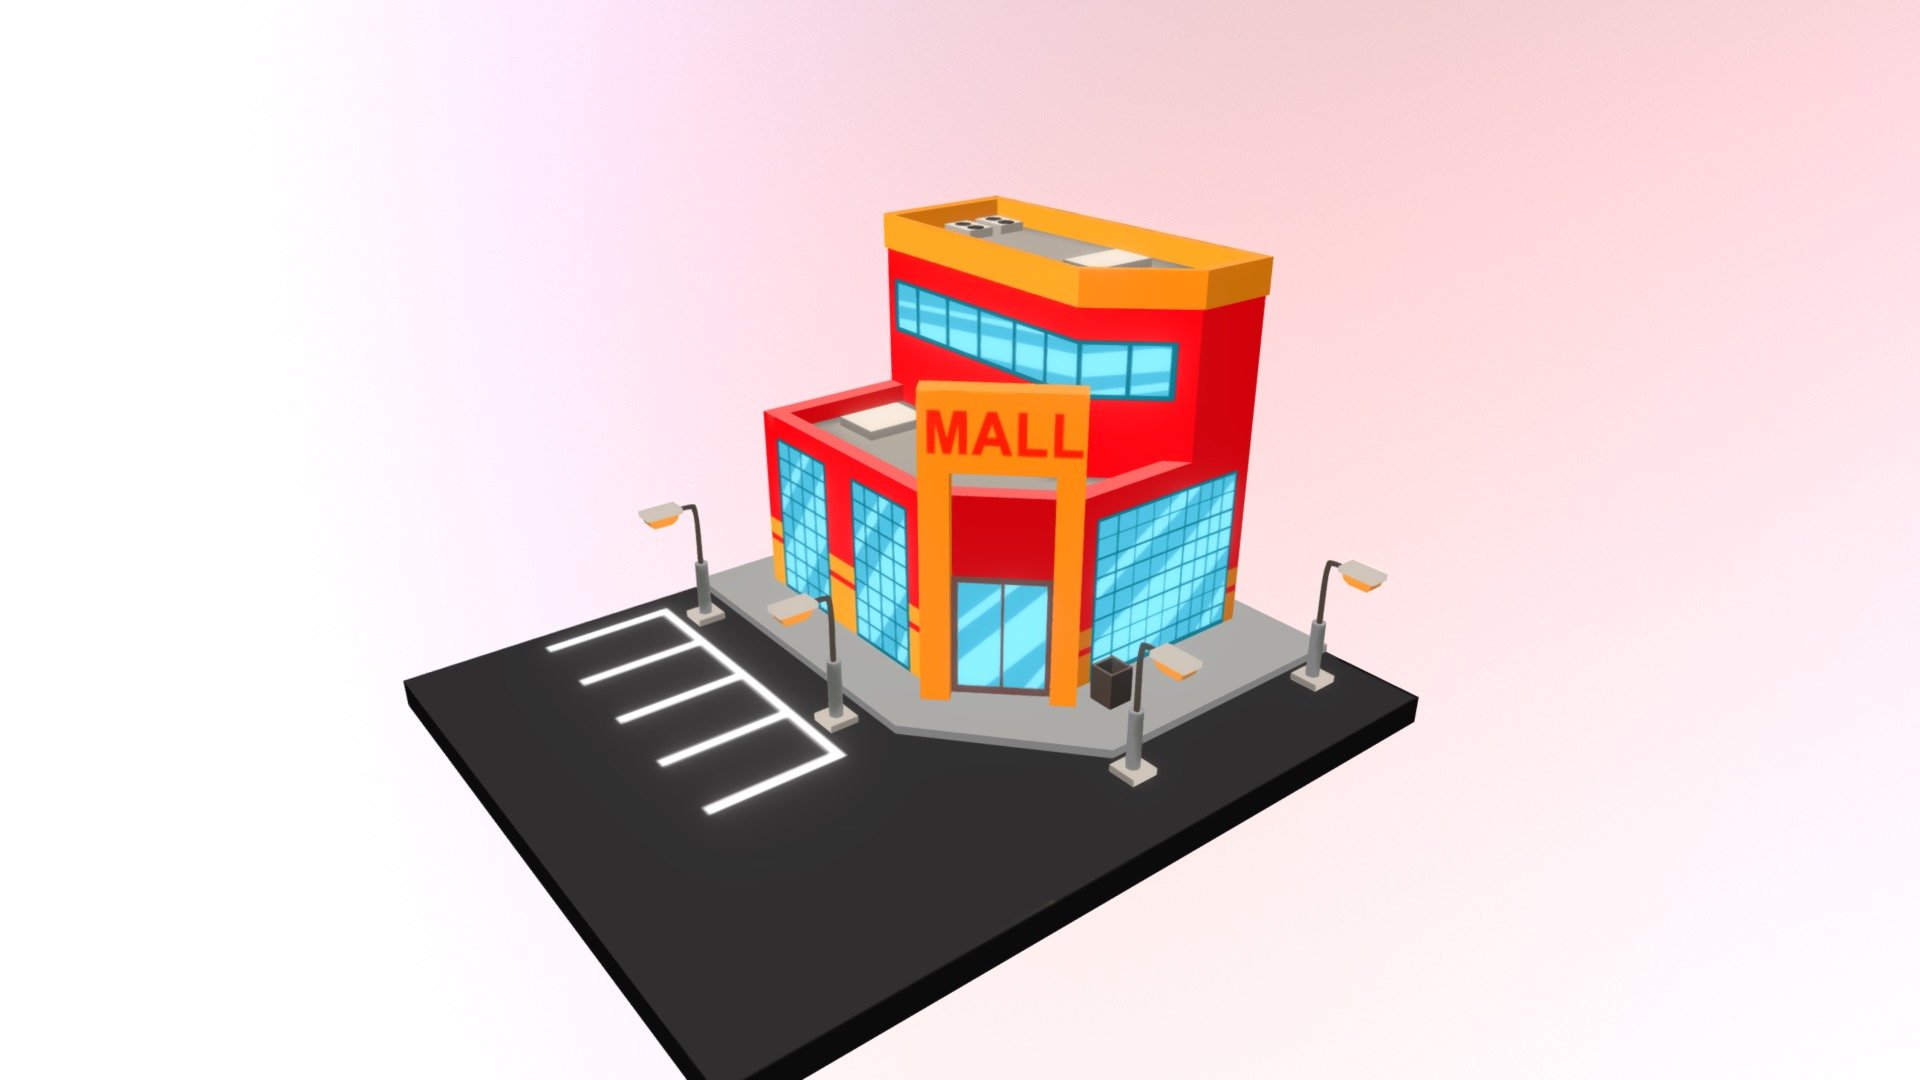 Third isometric cutie is the Mall x

Original 2D image created by: https://www.shutterstock.com/g/vectorshow

If it was a cake you could just eat it&hellip; - Isometric: Mall - Download Free 3D model by pixipui 3d model